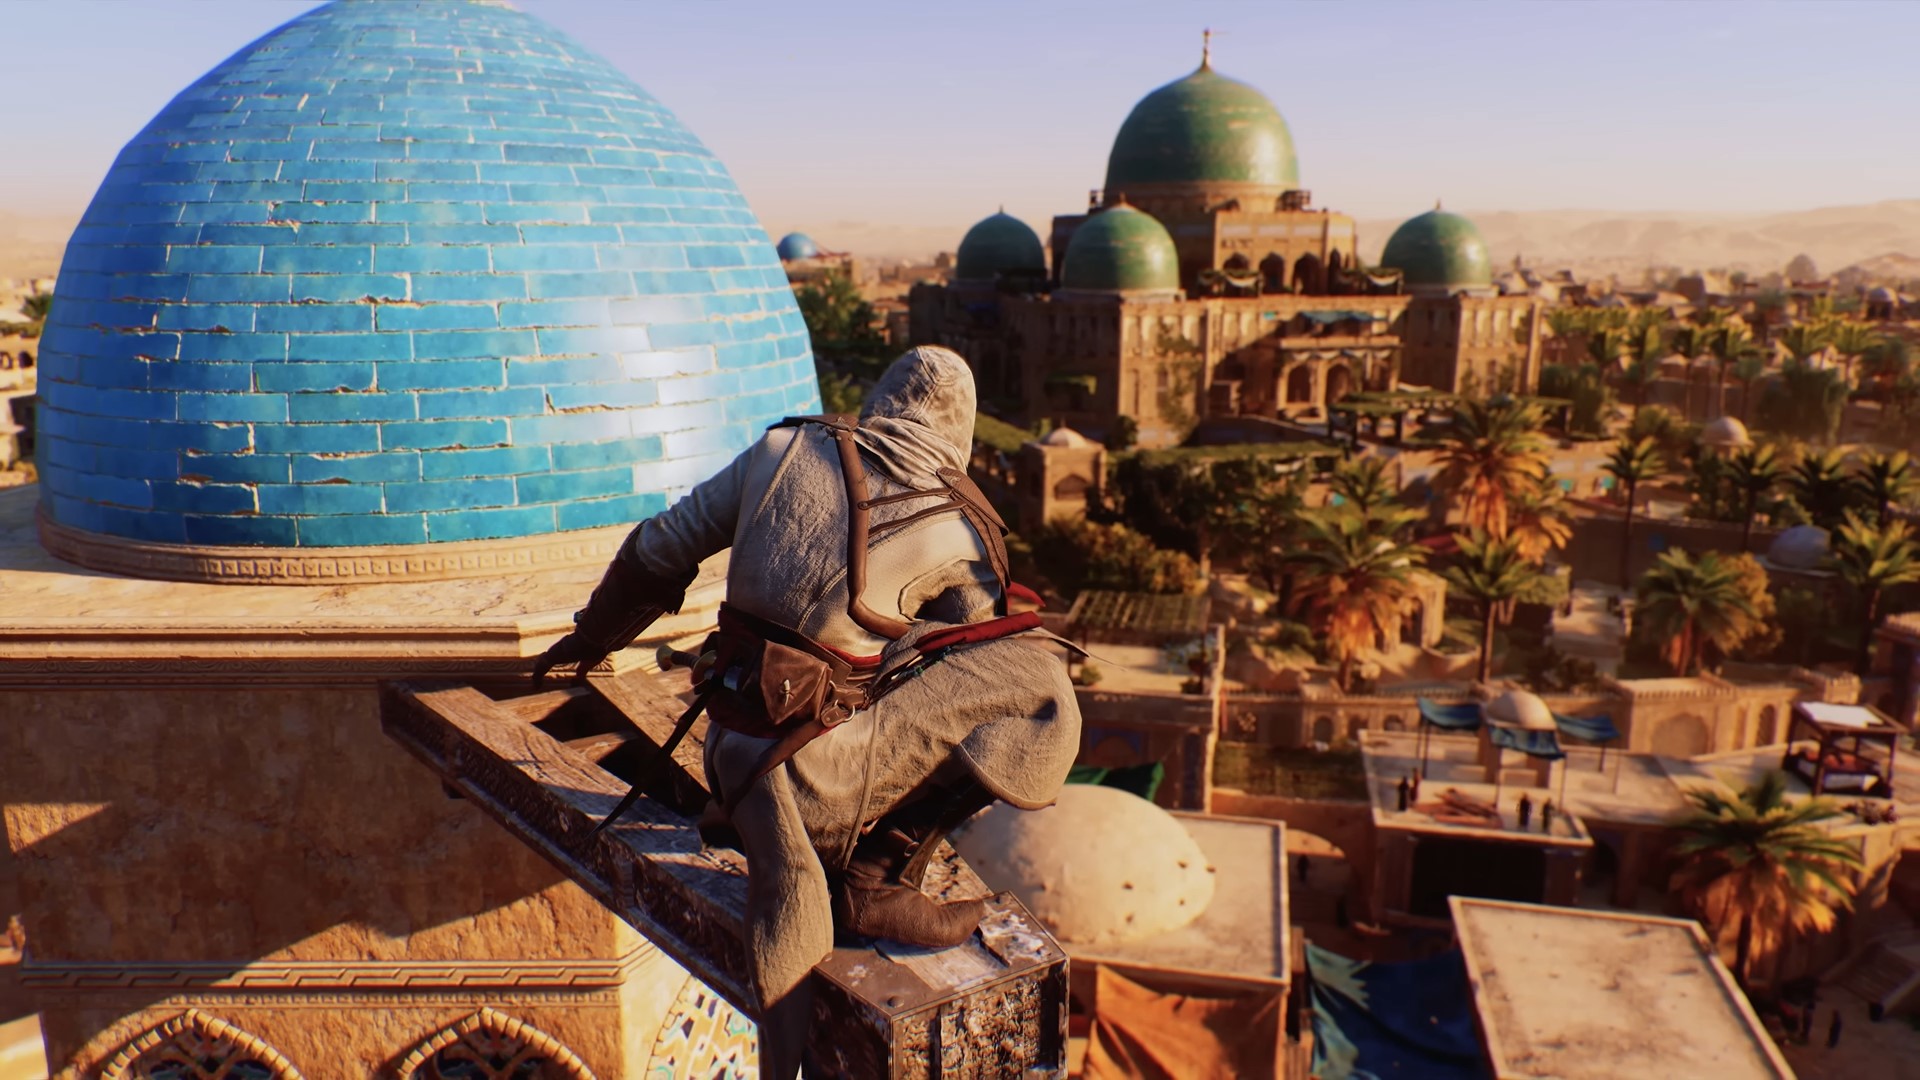 Assassin’s Creed Mirage Photo Mode Shown off in New Screenshots